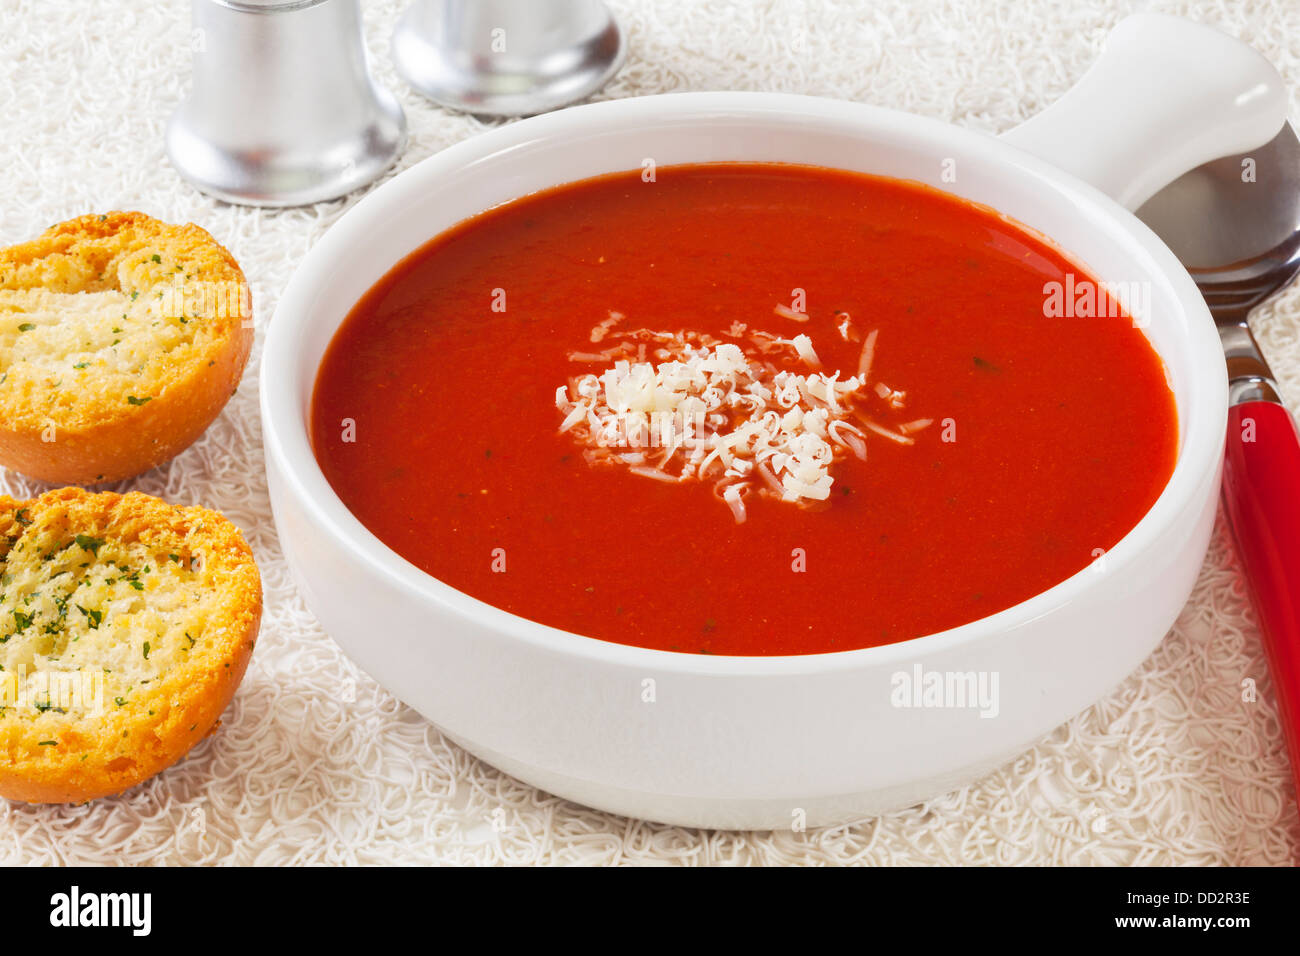 Tomato Soup - a bowl of tomato soup with garlic toasts, topped with a sprinkle of parmesan, on a white background. Stock Photo